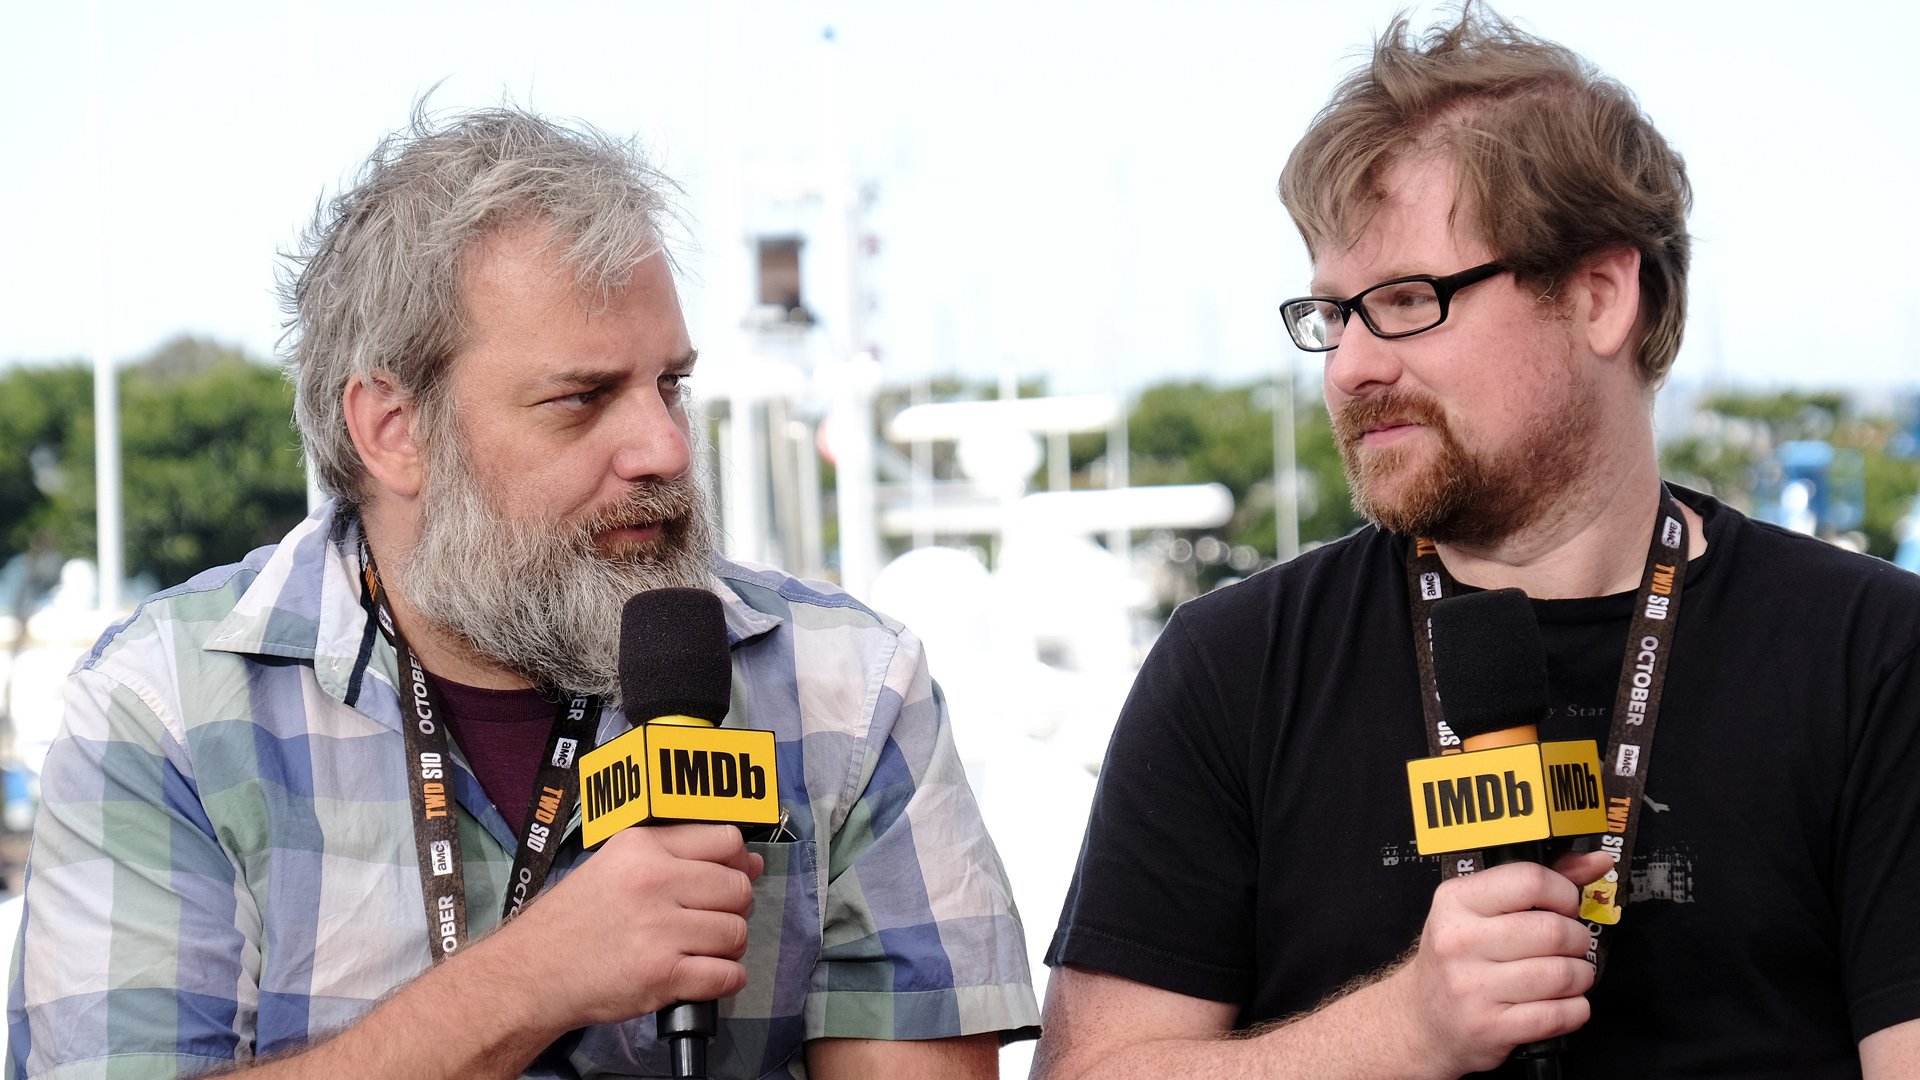 ‘Rick and Morty’ Season 5: Dan Harmon Updates Fans on the New Season and It Does Not Disappoint